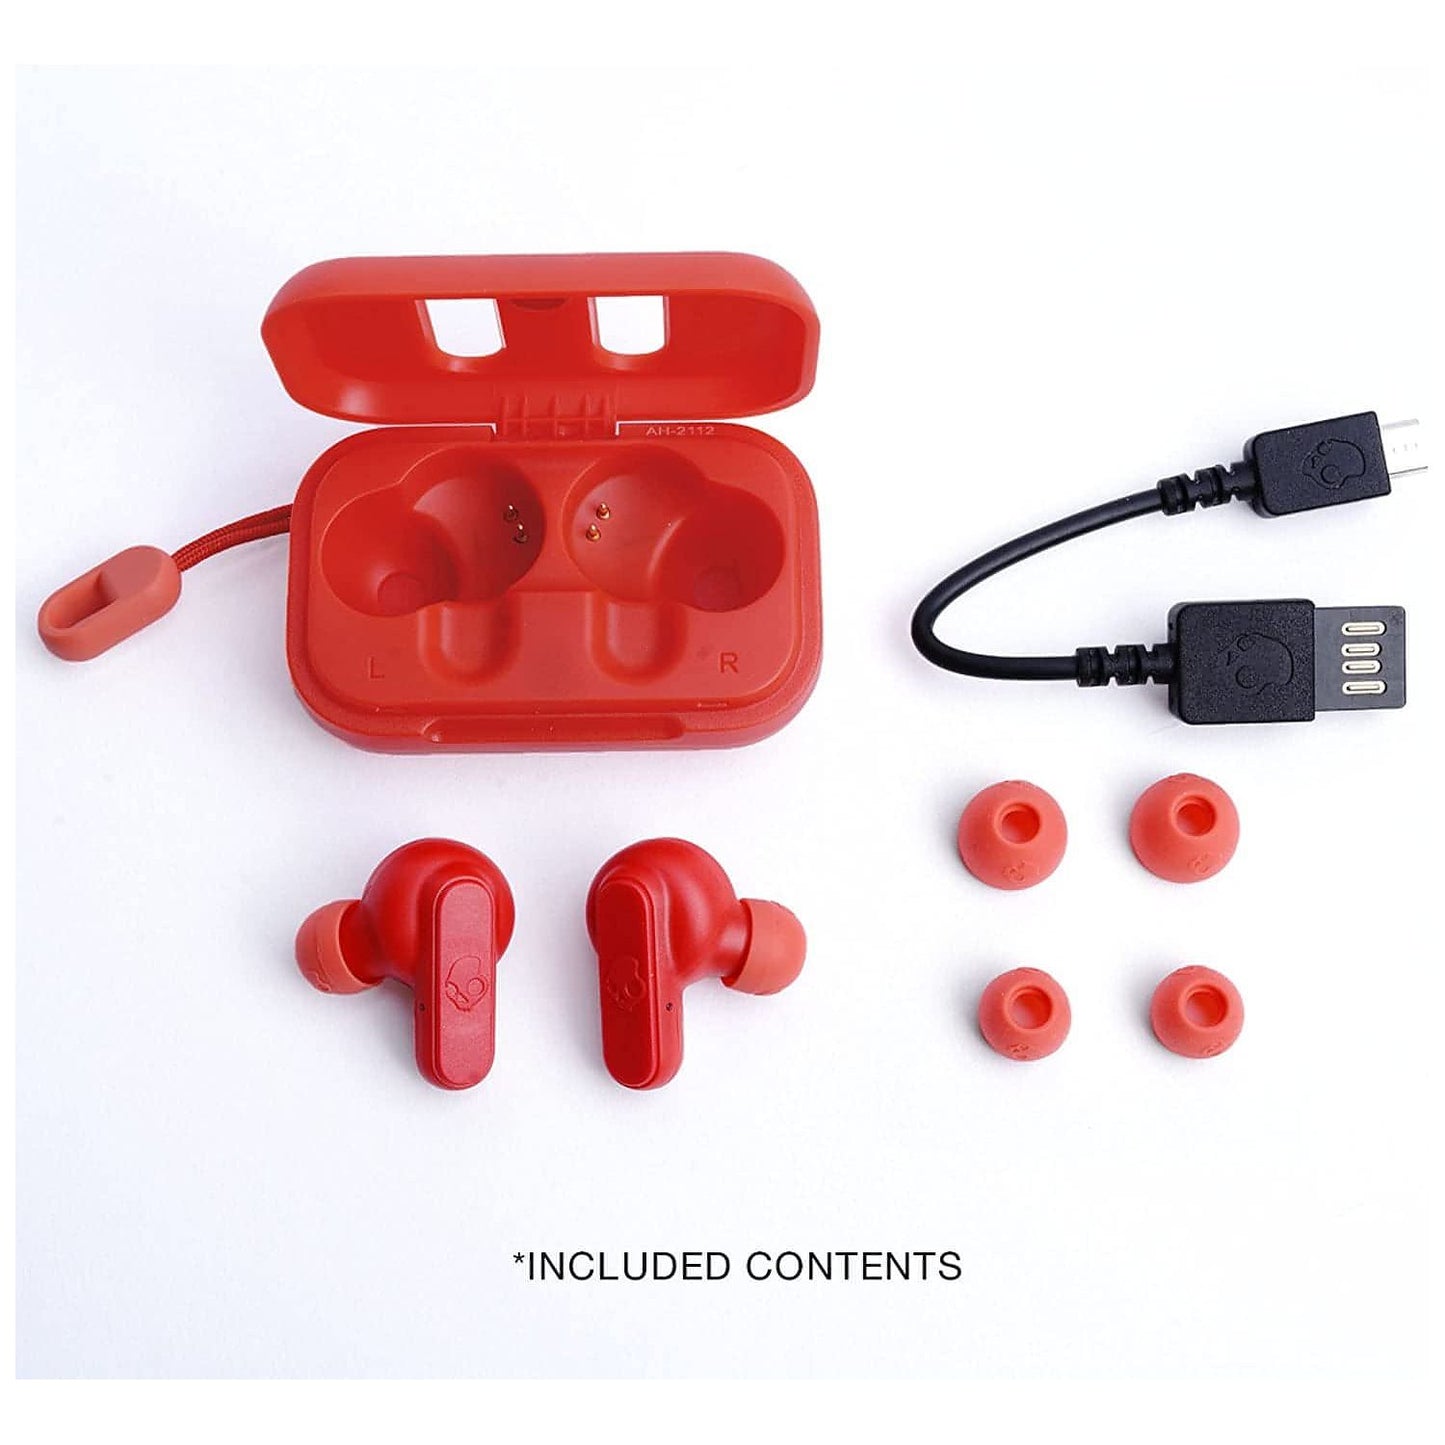 Skullcandy Dime True Wireless In Ear Earbuds With Charging Case (Golden Red)